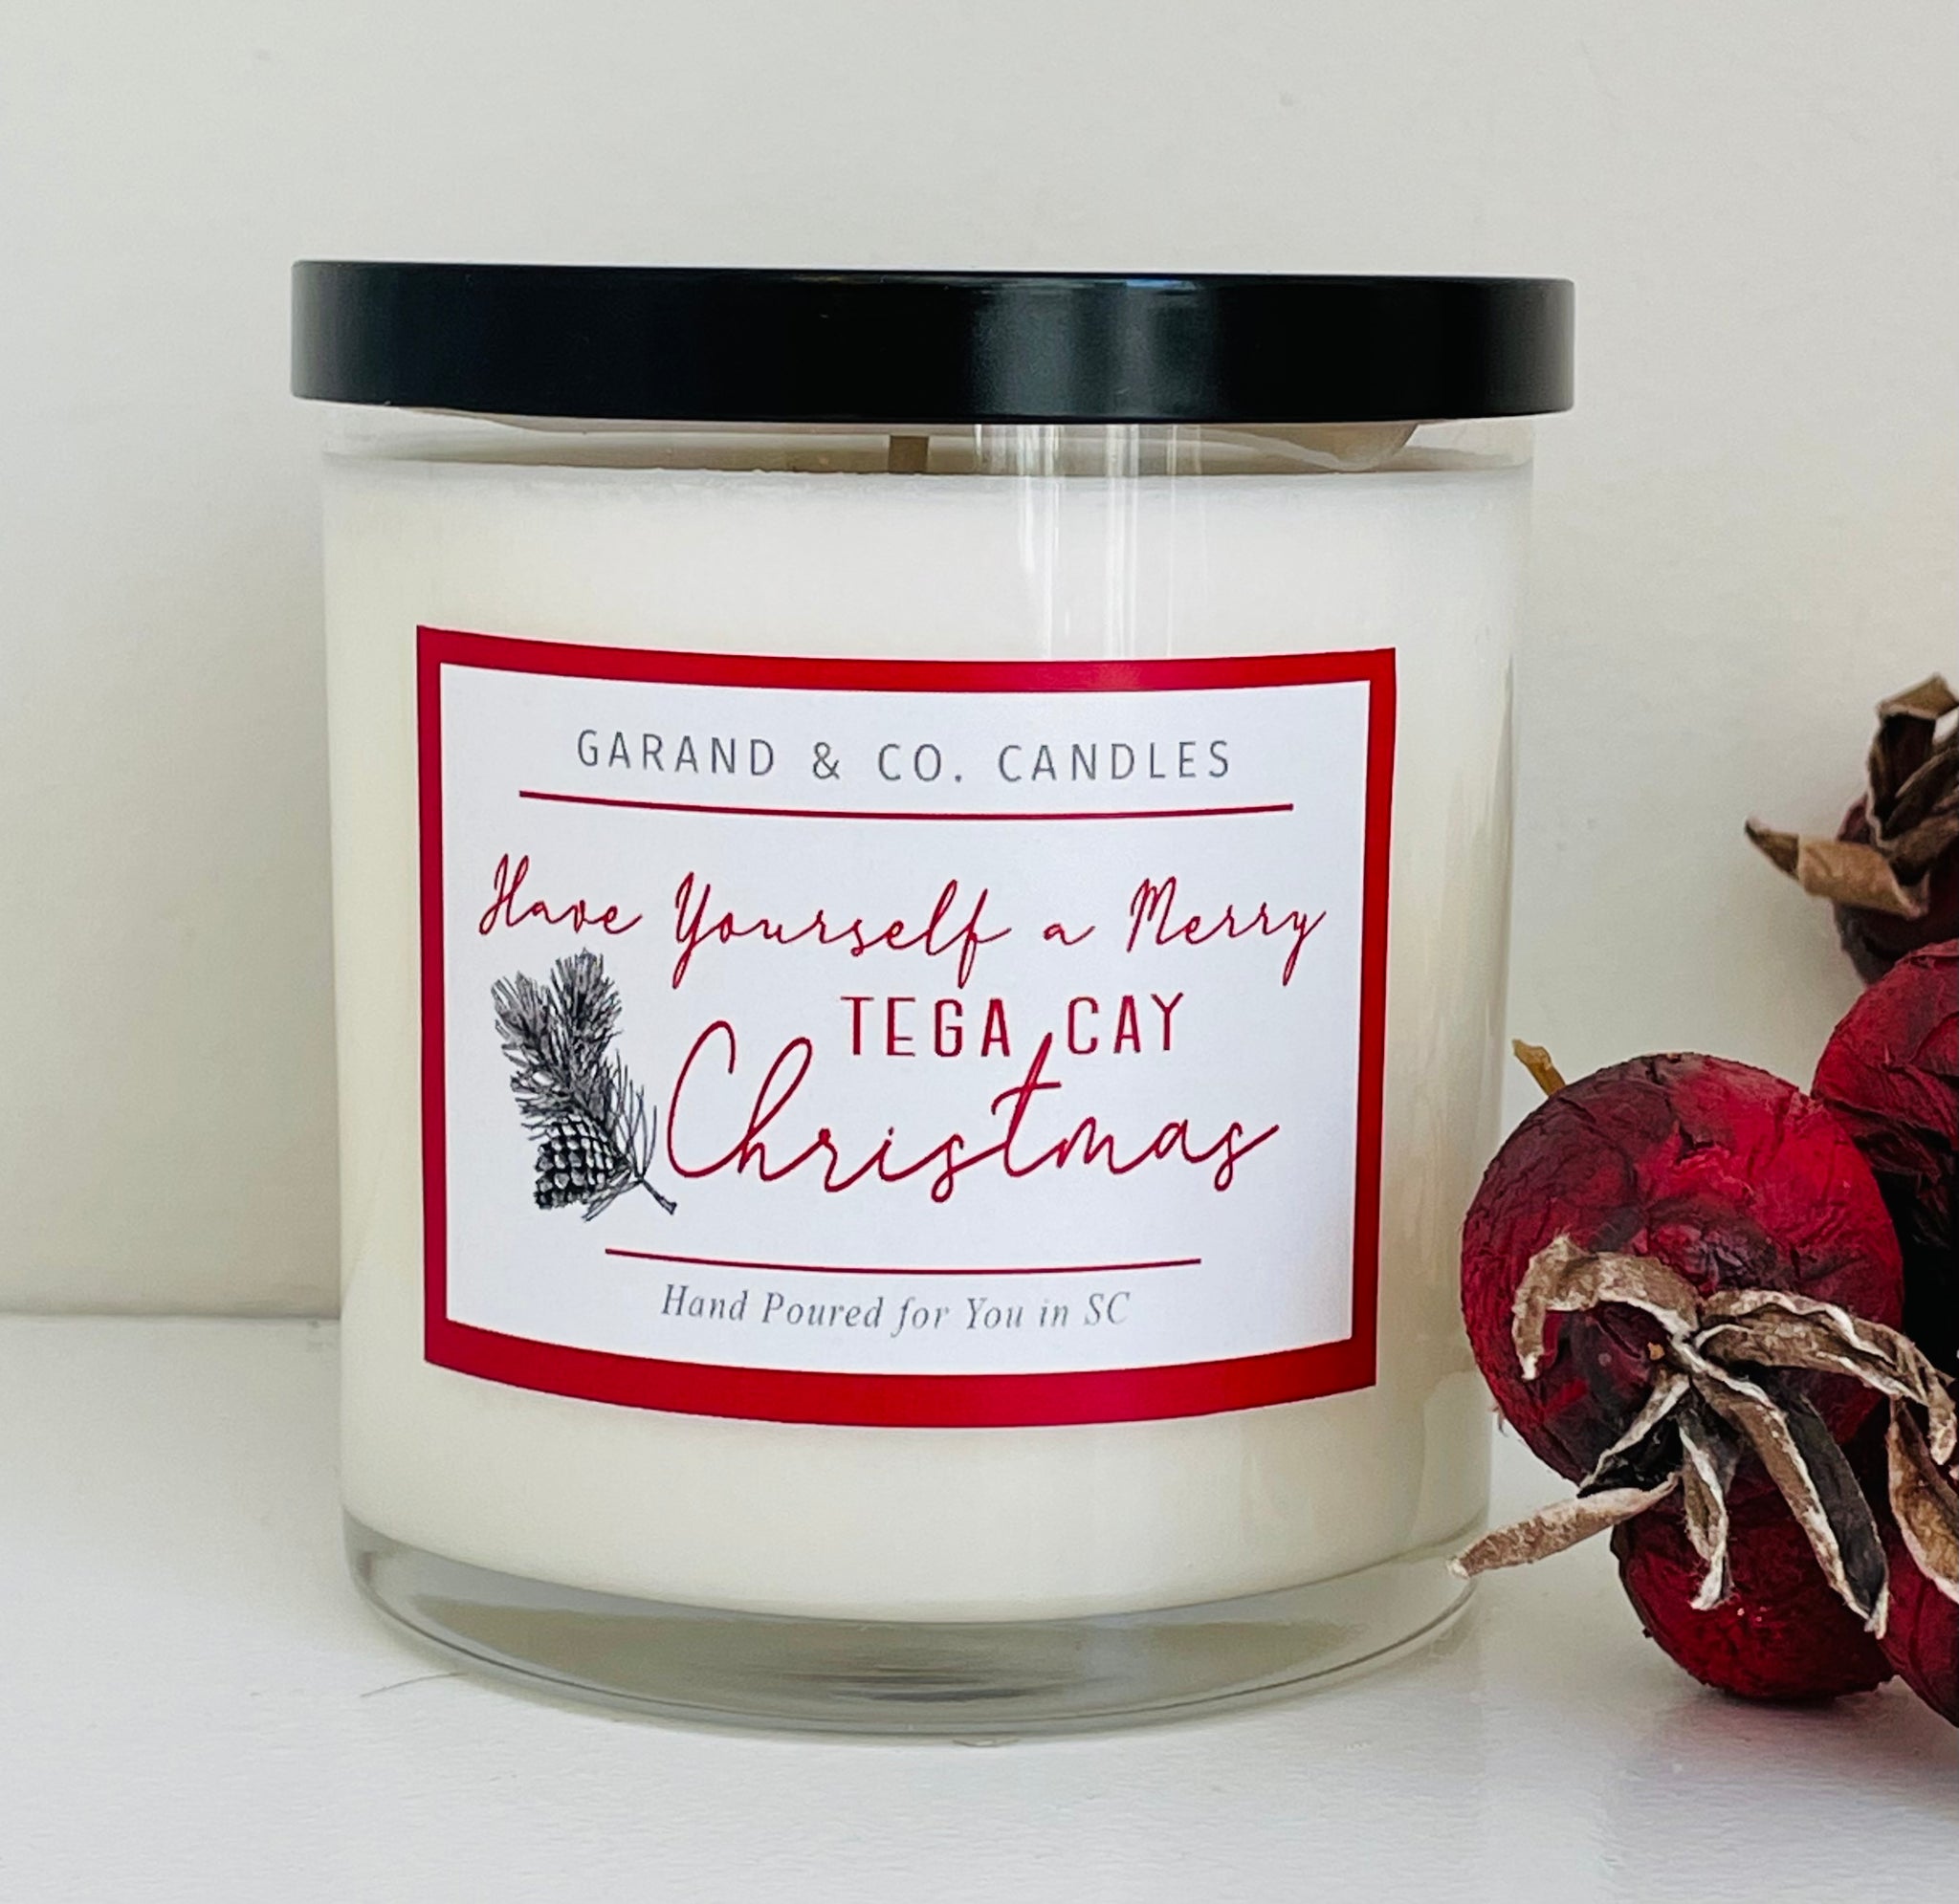 12 oz Clear Glass Jar Candle -  Have Yourself A Merry Tega Cay Christmas